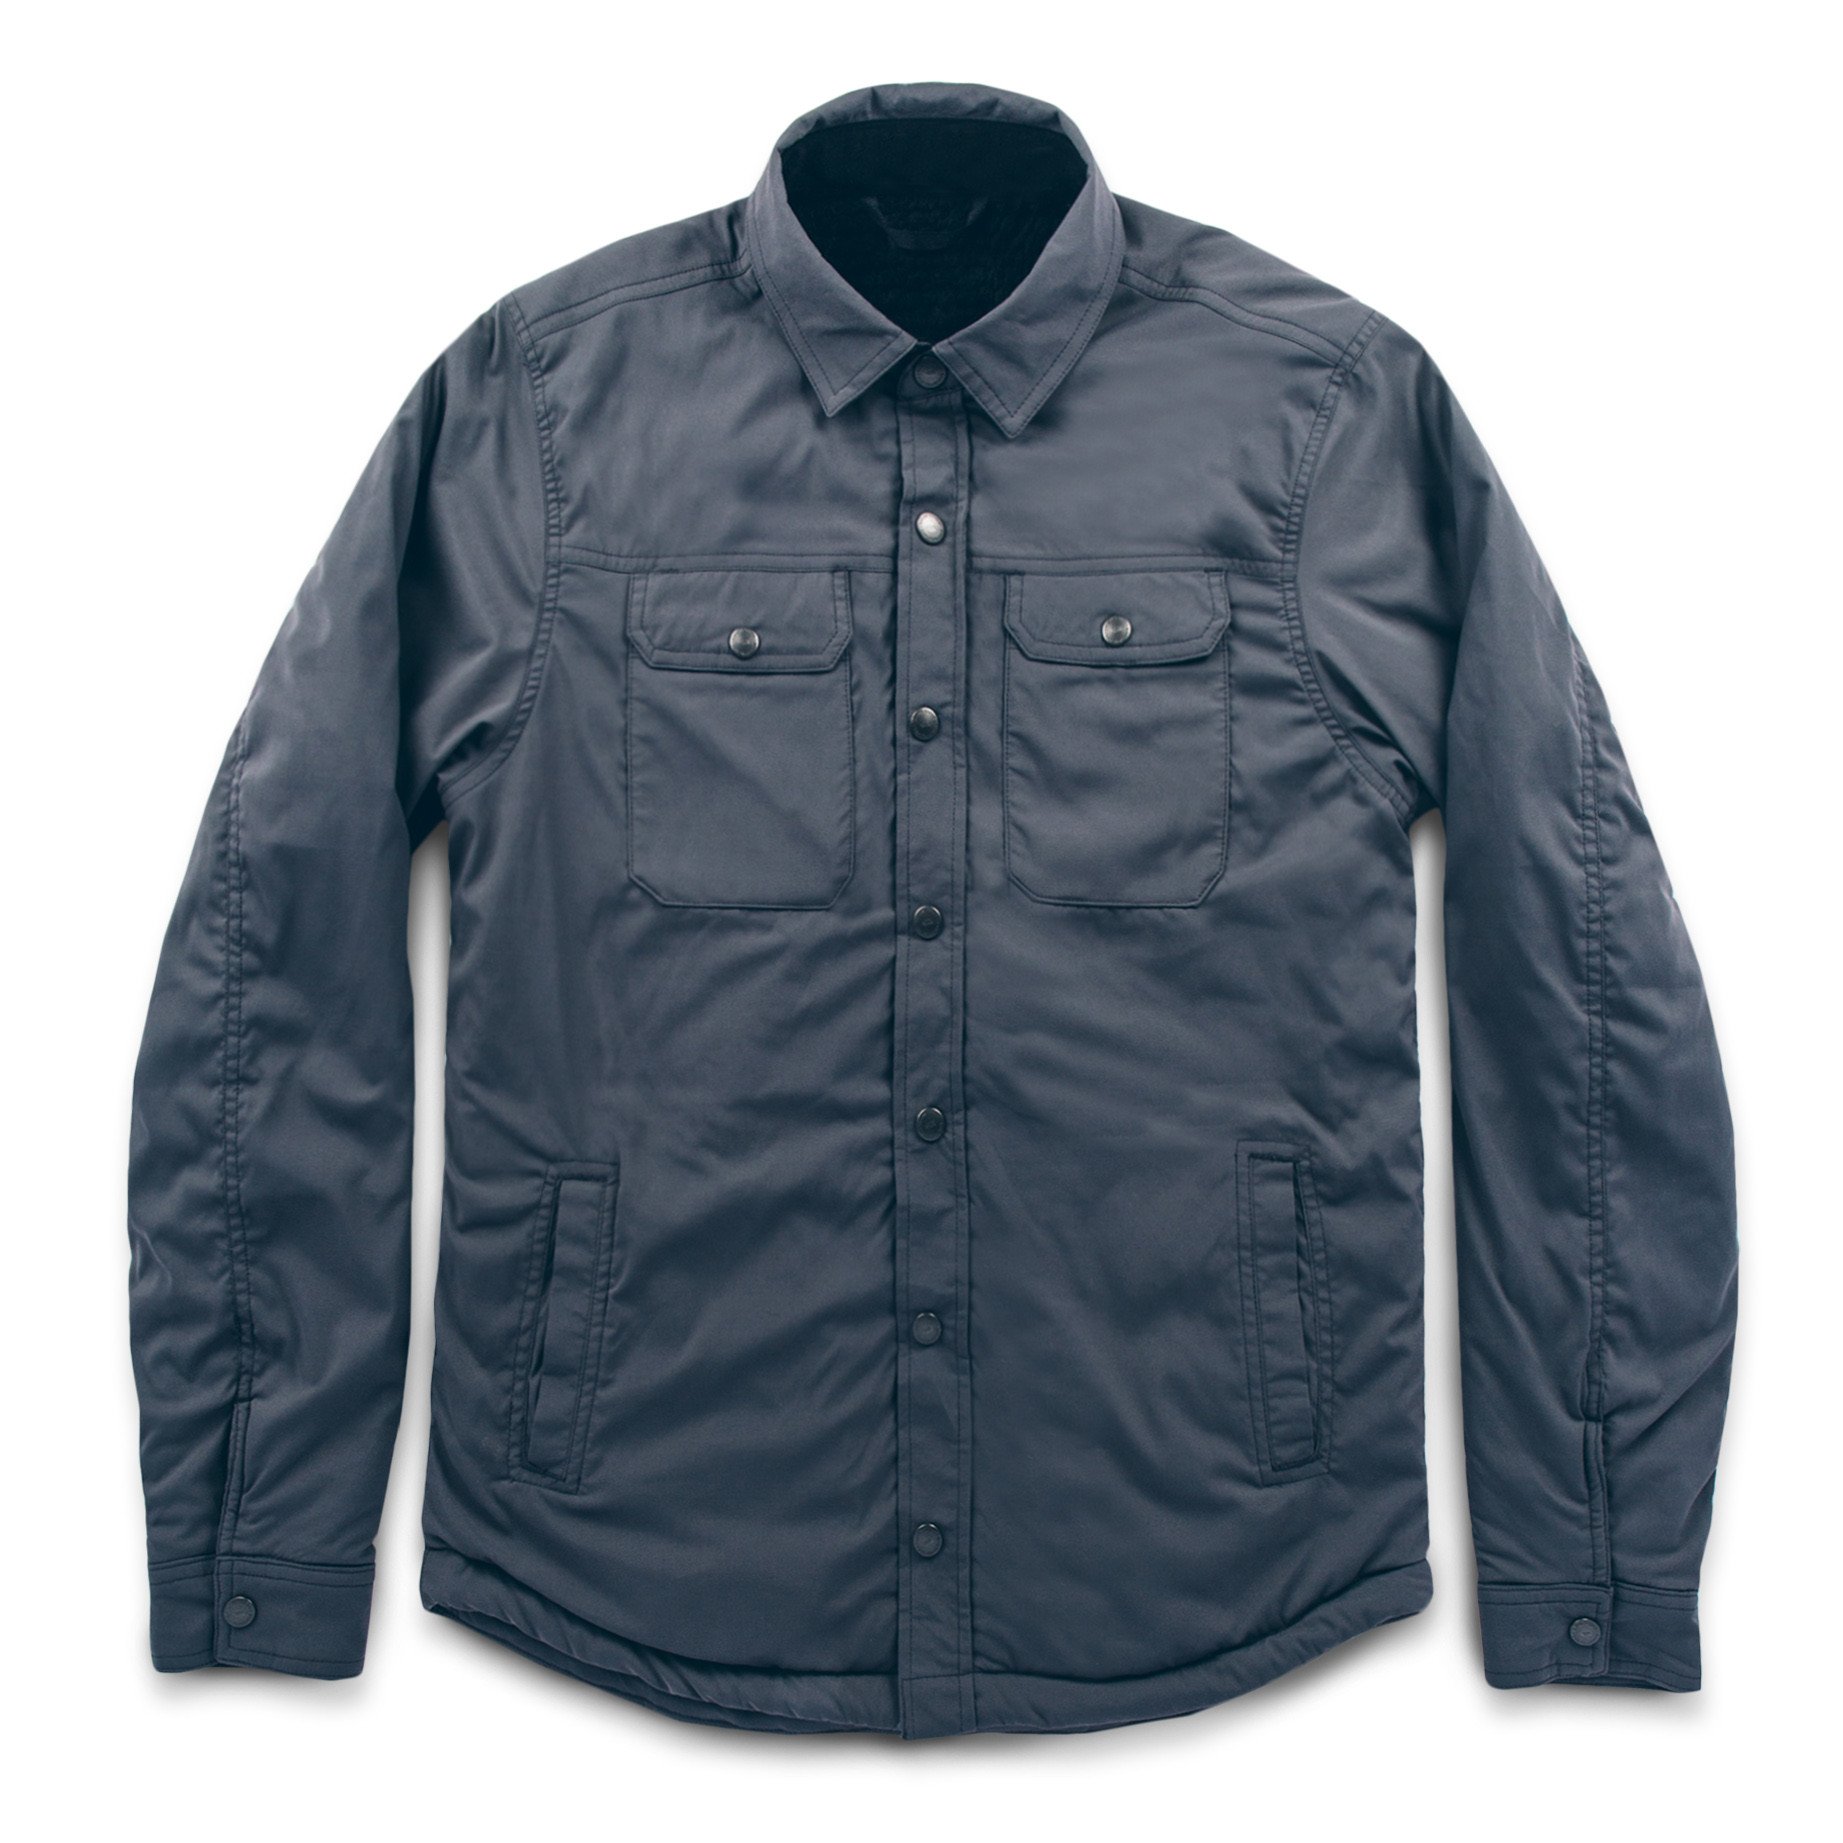 The Albion Jacket